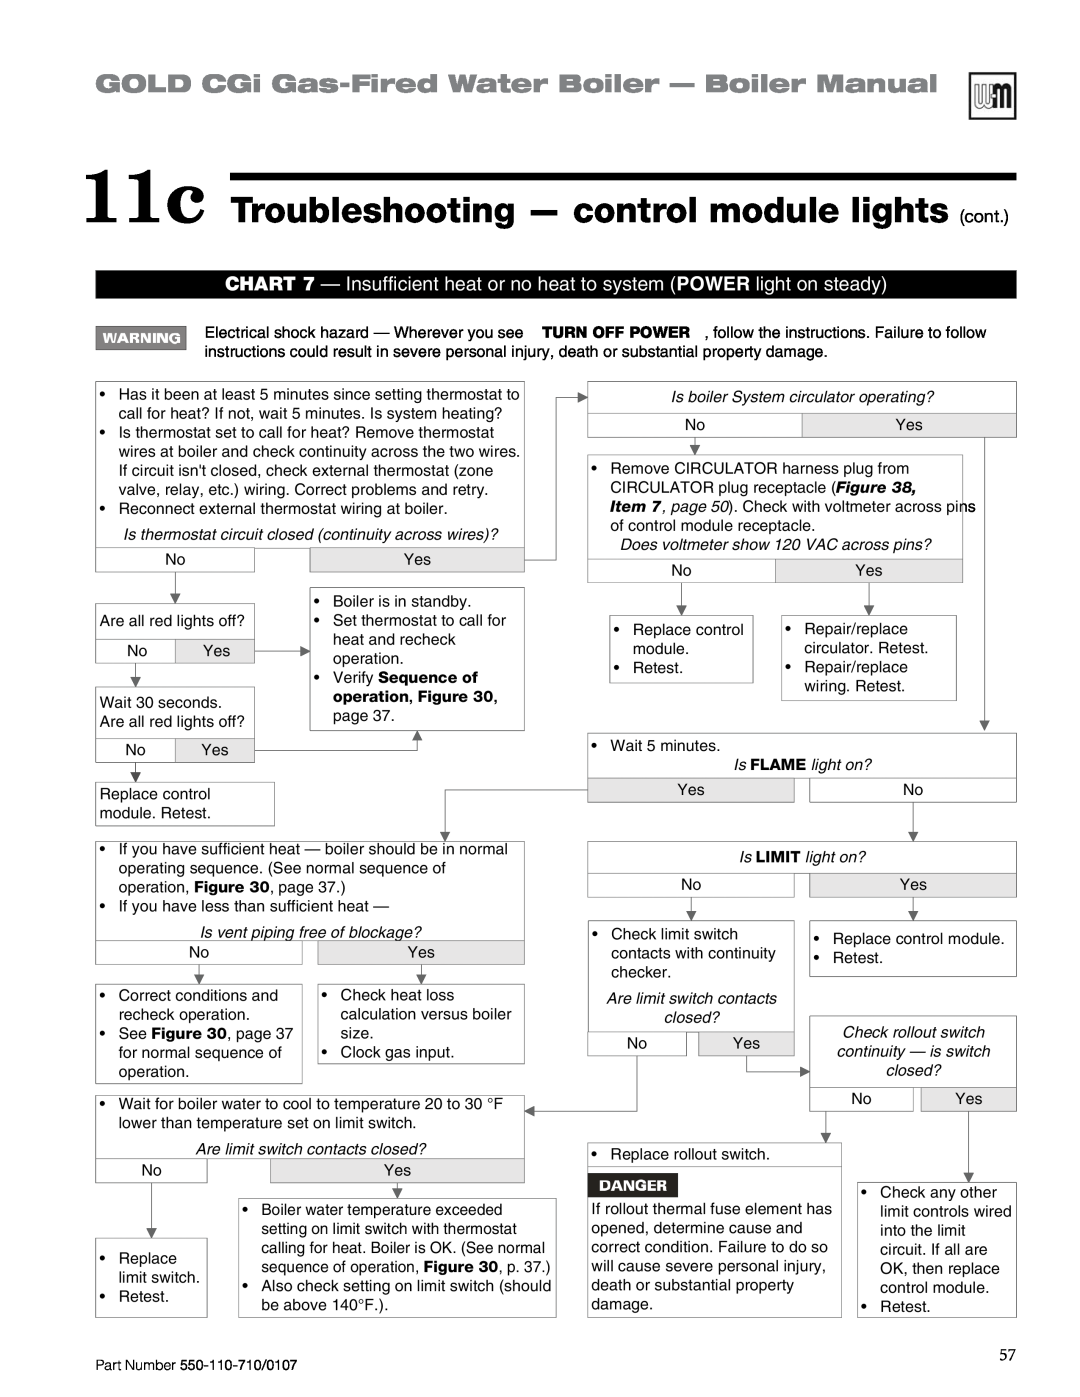 Weil-McLain 550-110-710/0107 manual 11c Troubleshooting — control module lights cont, Is vent piping free of blockage? 